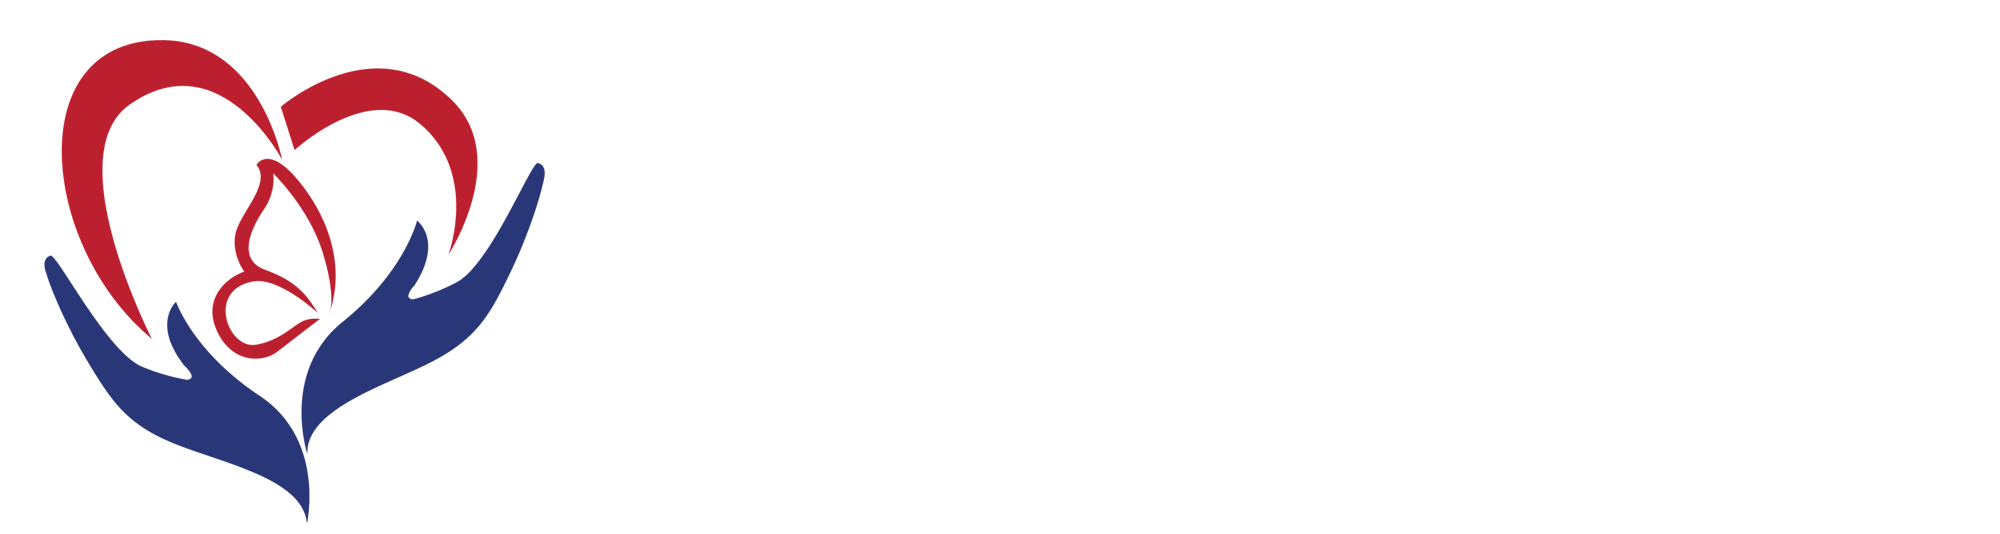 First Trust Home Care